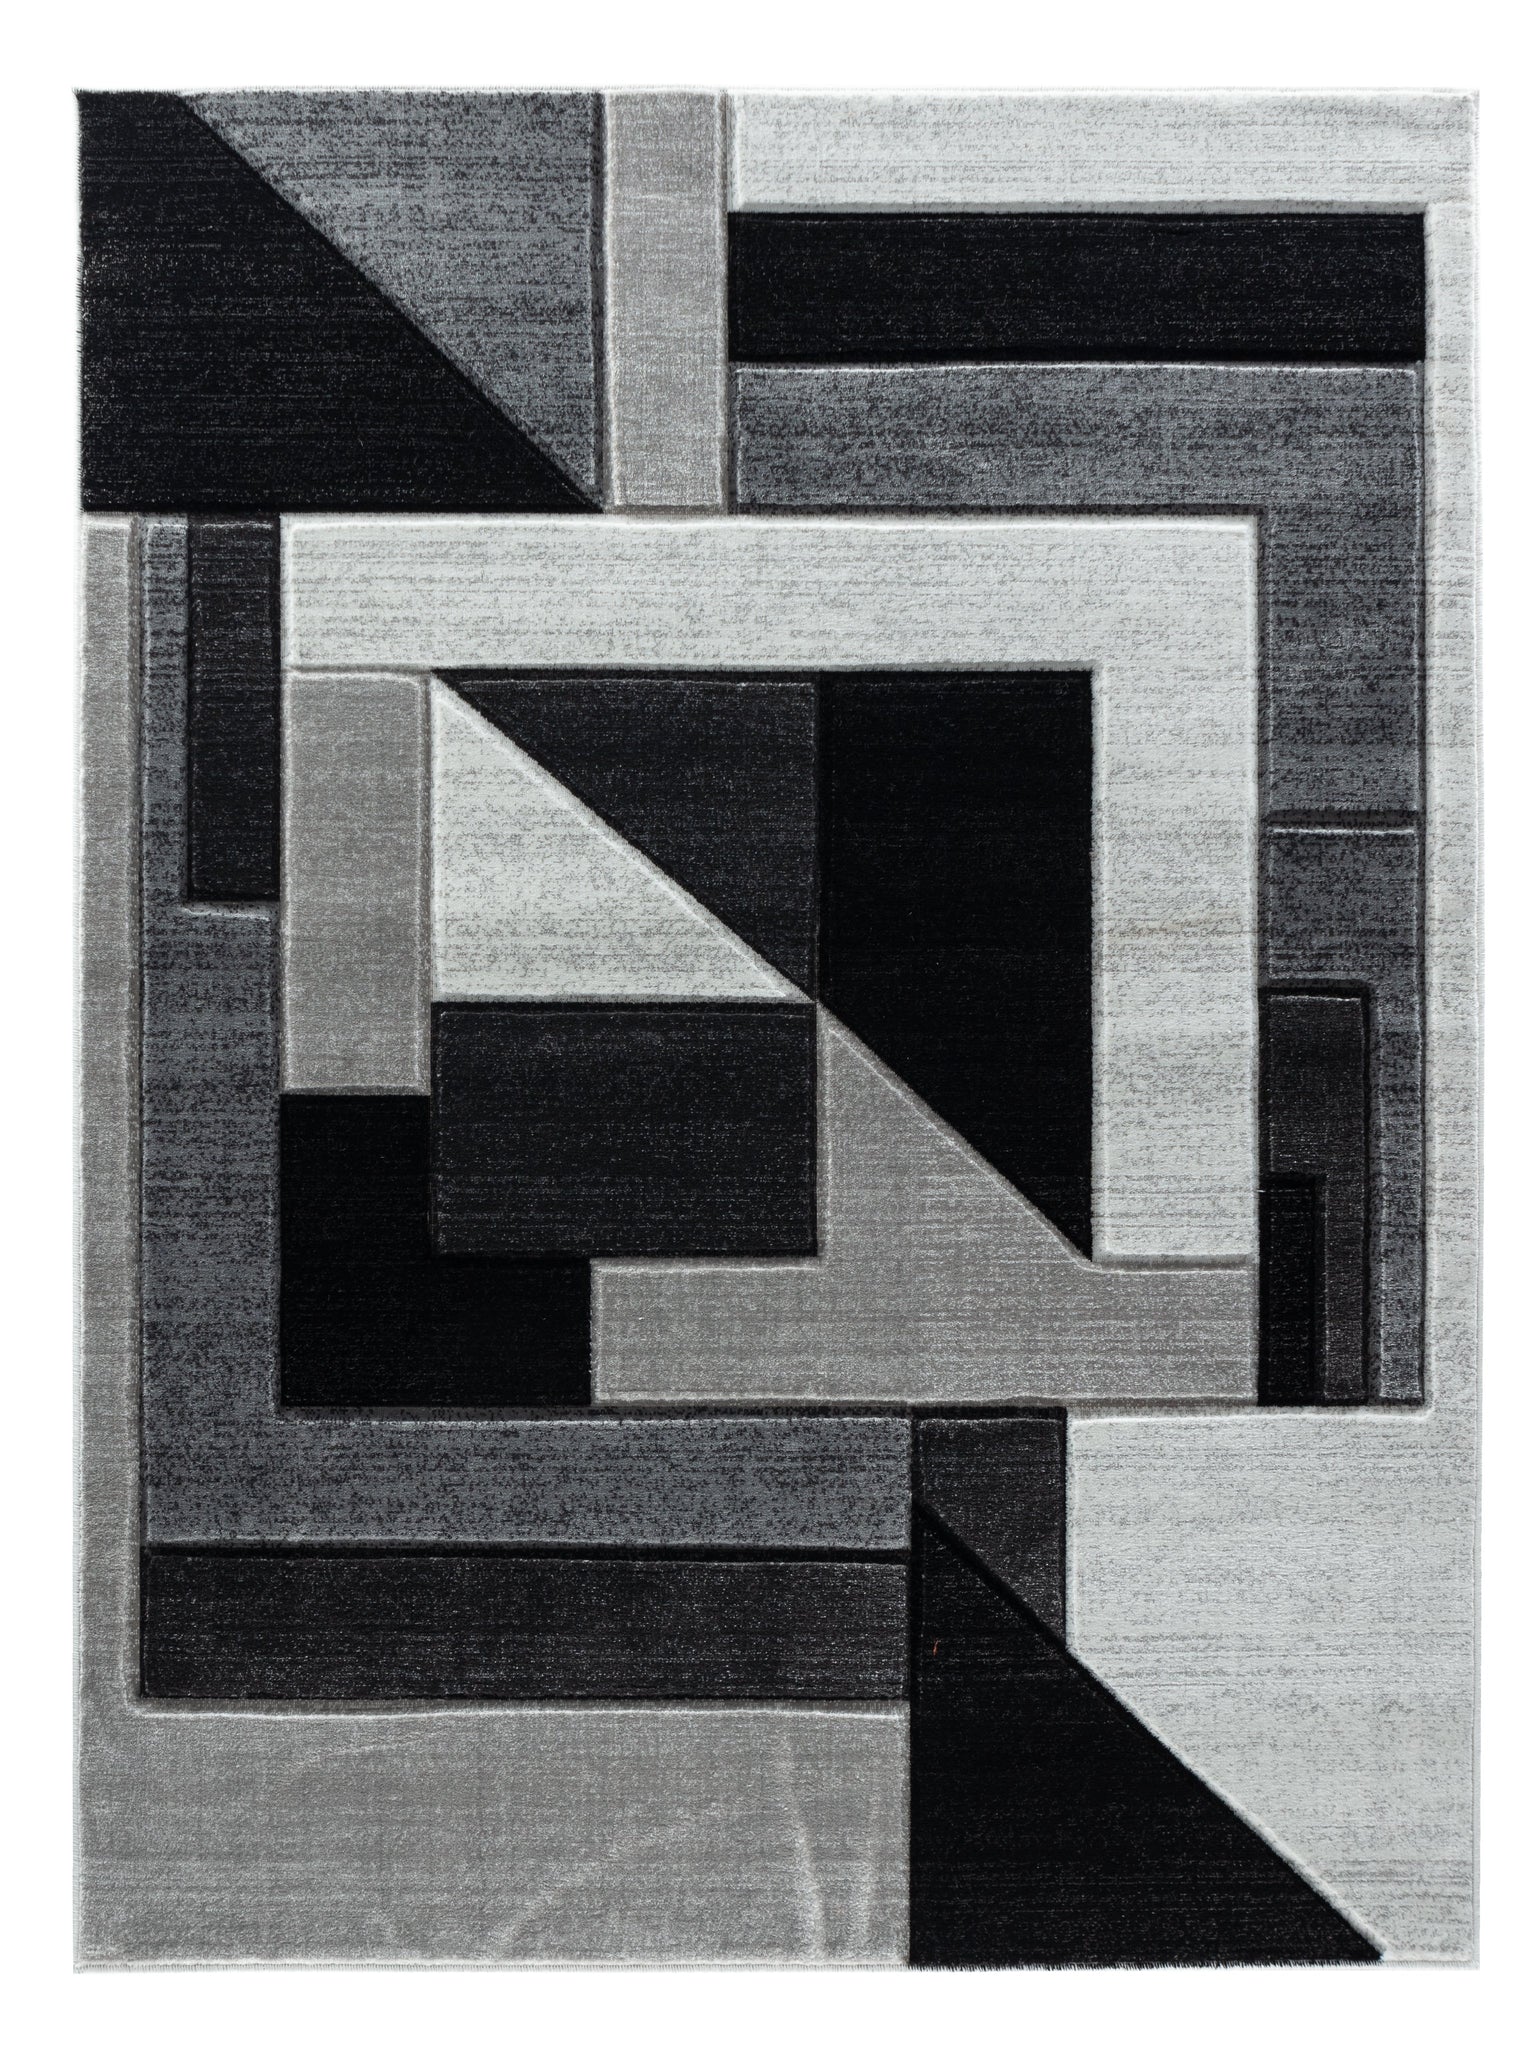 Grey/Silver/Black/Abstract Area Rug Modern Contemporary Geometric